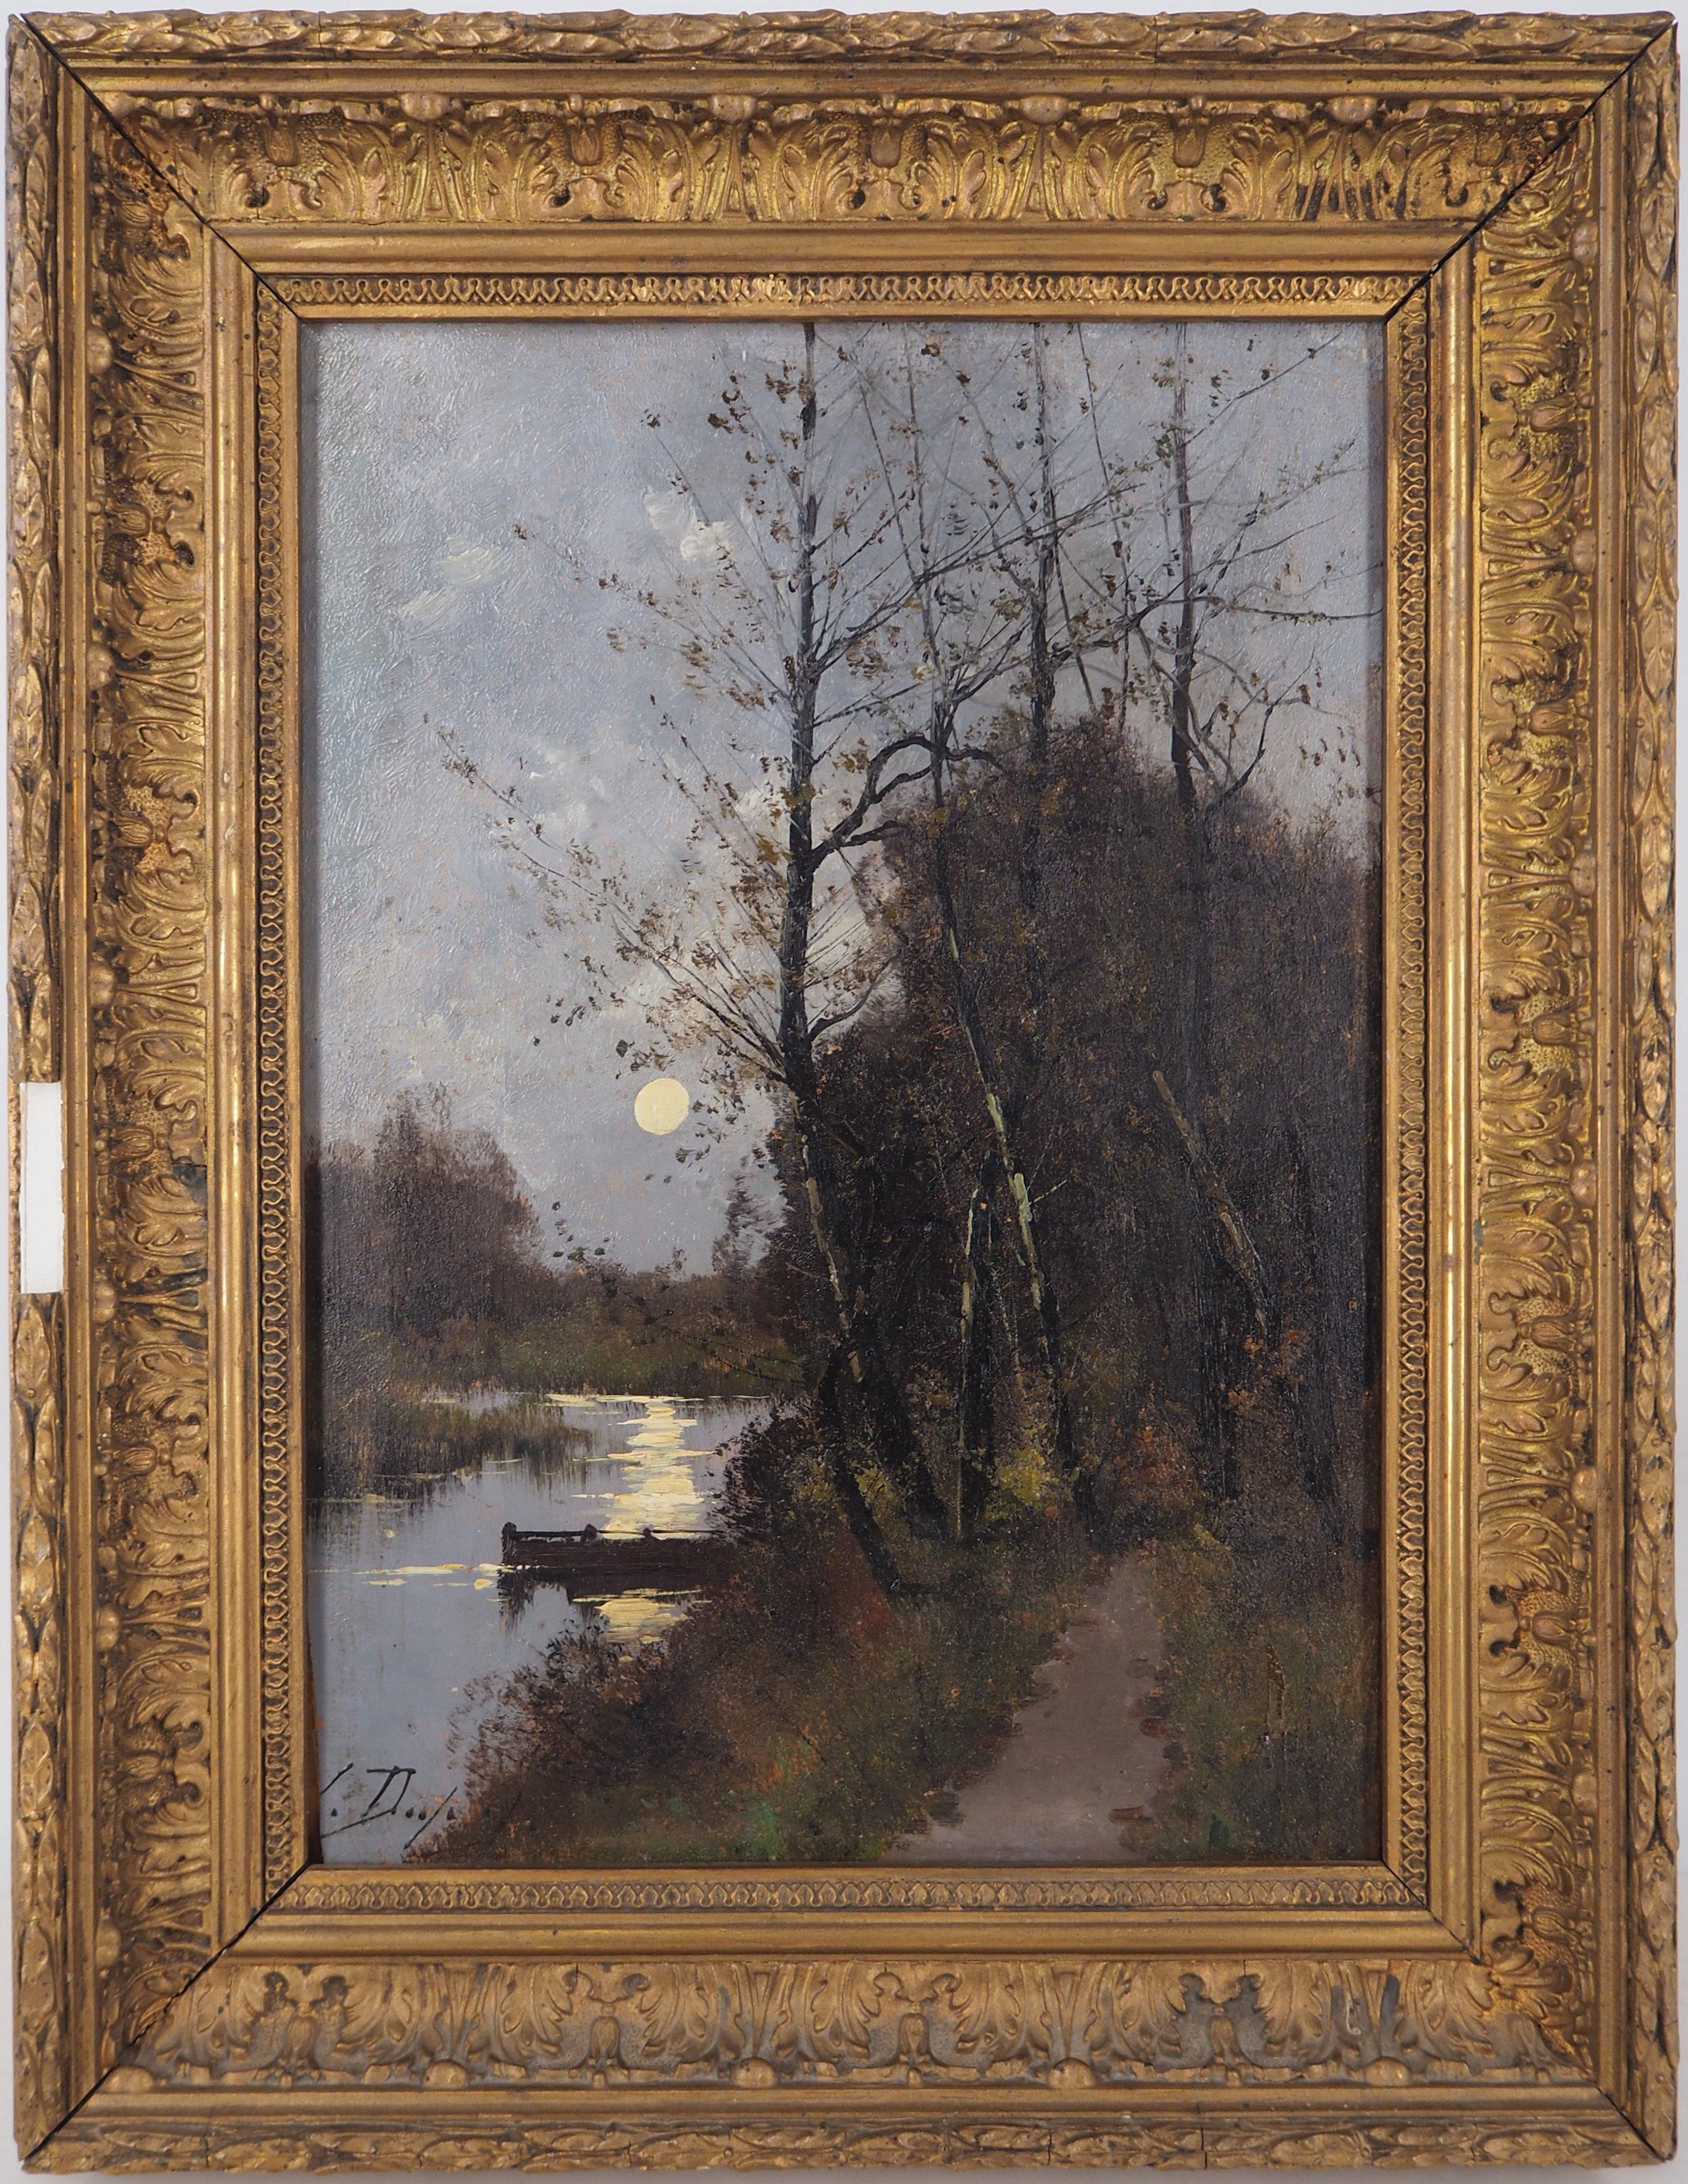 Eugene Galien-Laloue Landscape Painting - River at the Moonlight - Original painting on board - Signed